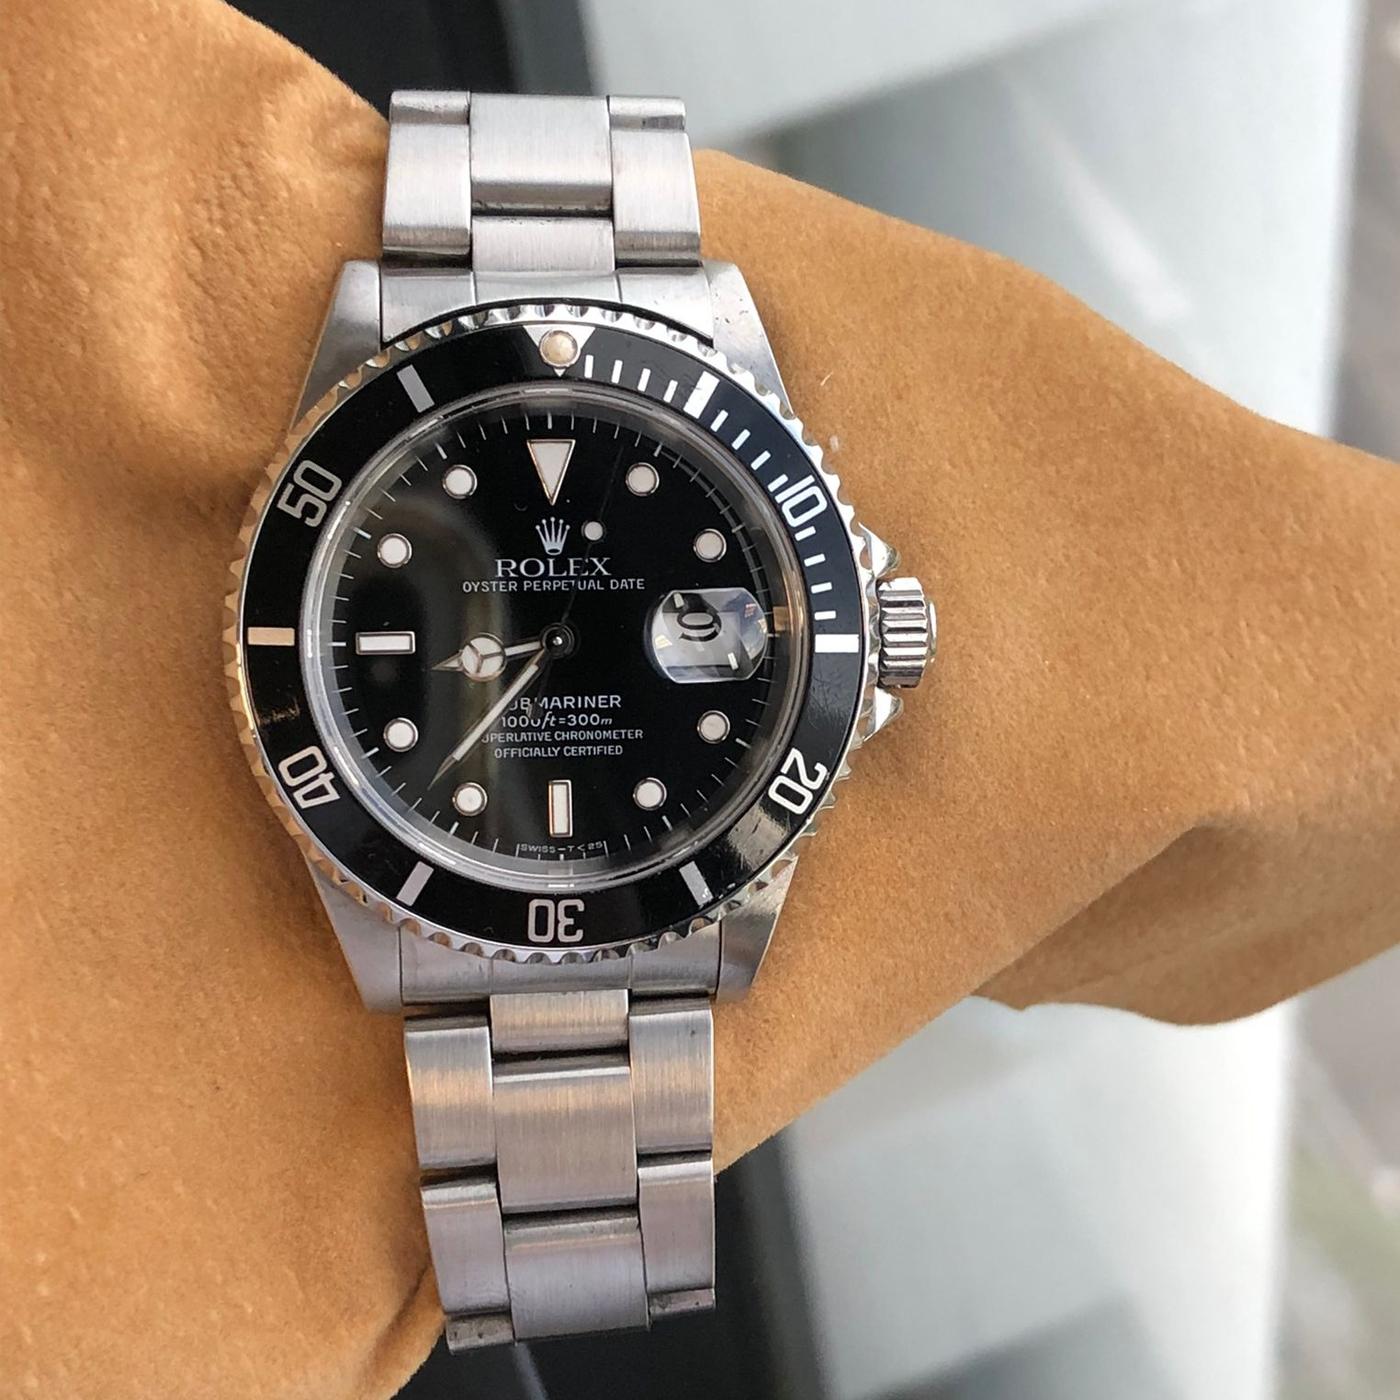 Rolex Submariner Date 40mm Black Dial Stainless Steel Oyster Watch 16610 For Sale 3